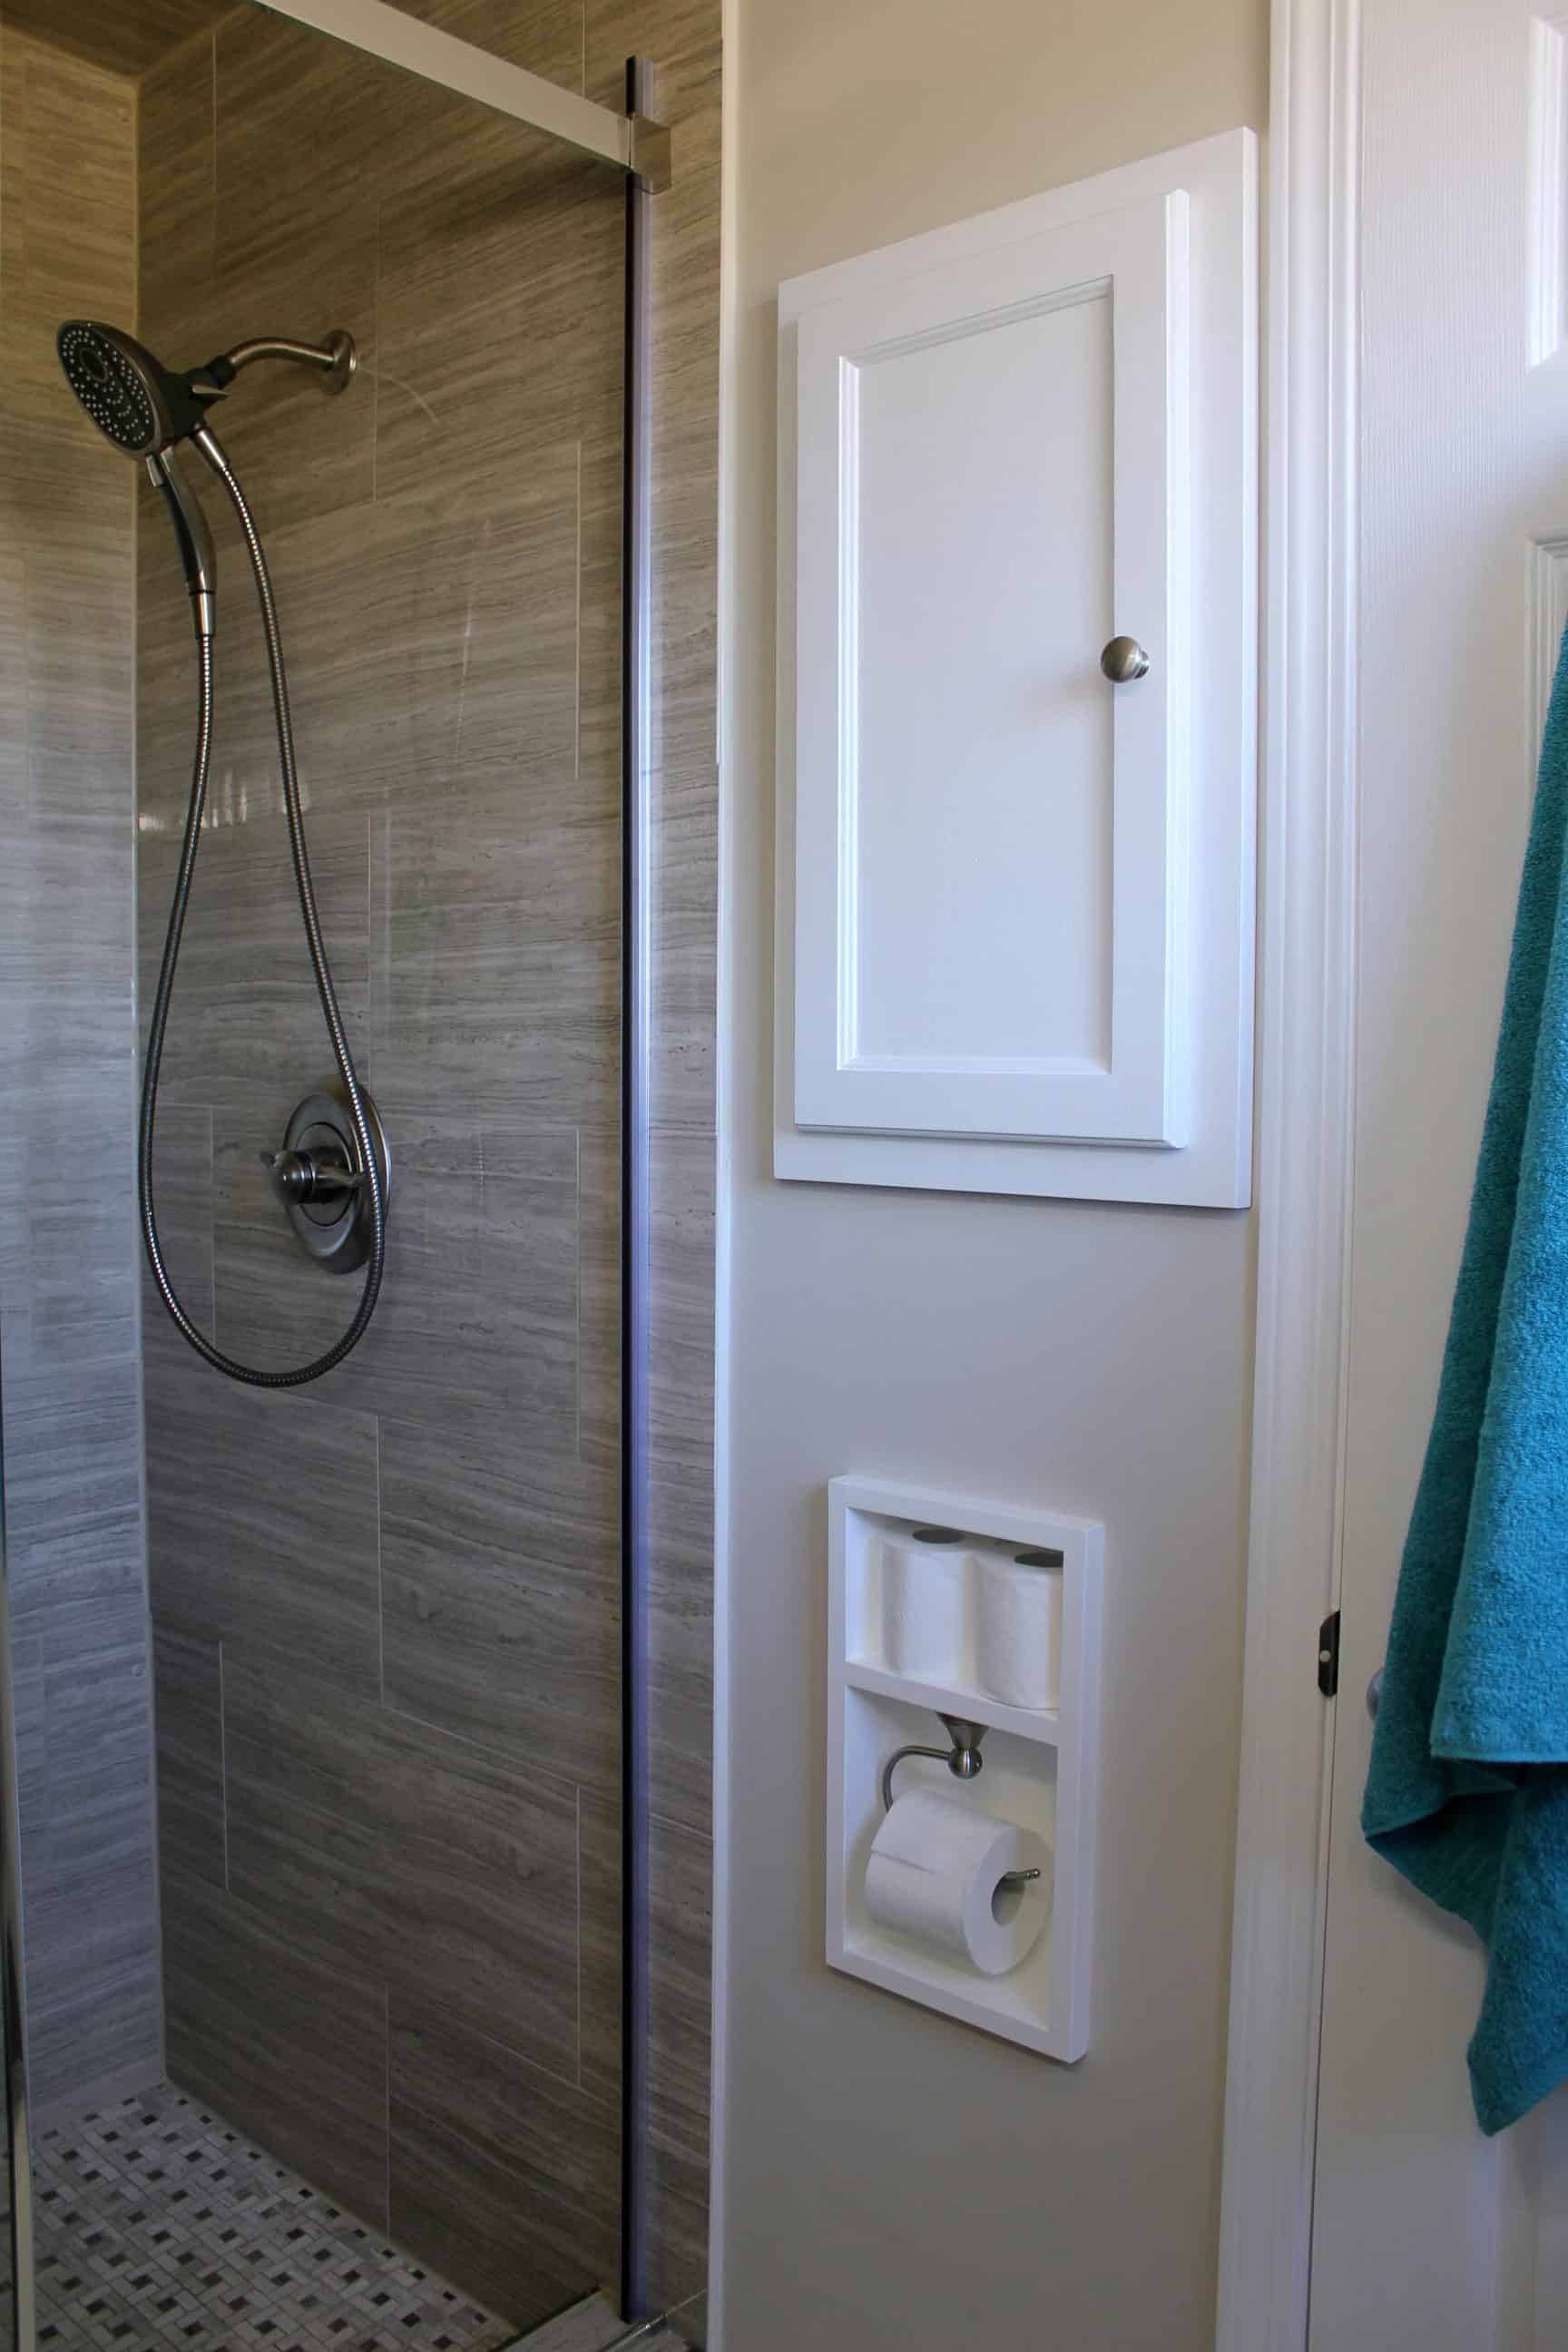 Use the space in between the studs in your wall to install a recessed medicine cabinet and toilet paper holder with shelf for extra toilet paper rolls 